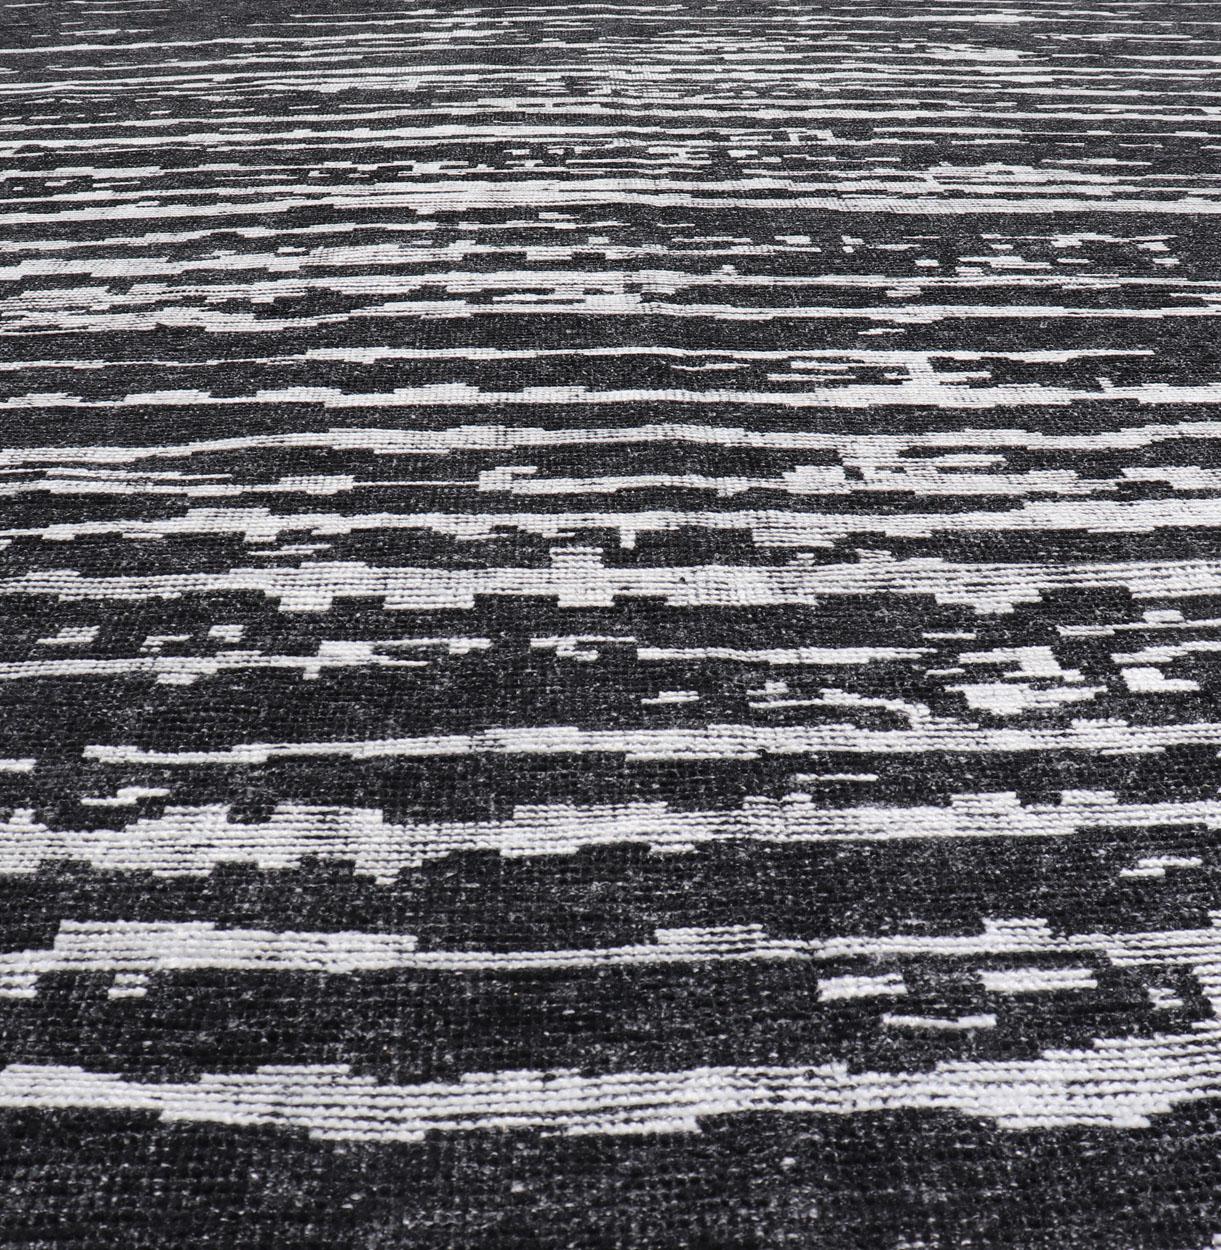 Measures 9'9 x 15'0 

The field is an asymmetrical blend of black and white. The piece features two different pile levels, giving this rug texture and character. This wonderful abstract carpet is a wonderful addition to any modern interior.